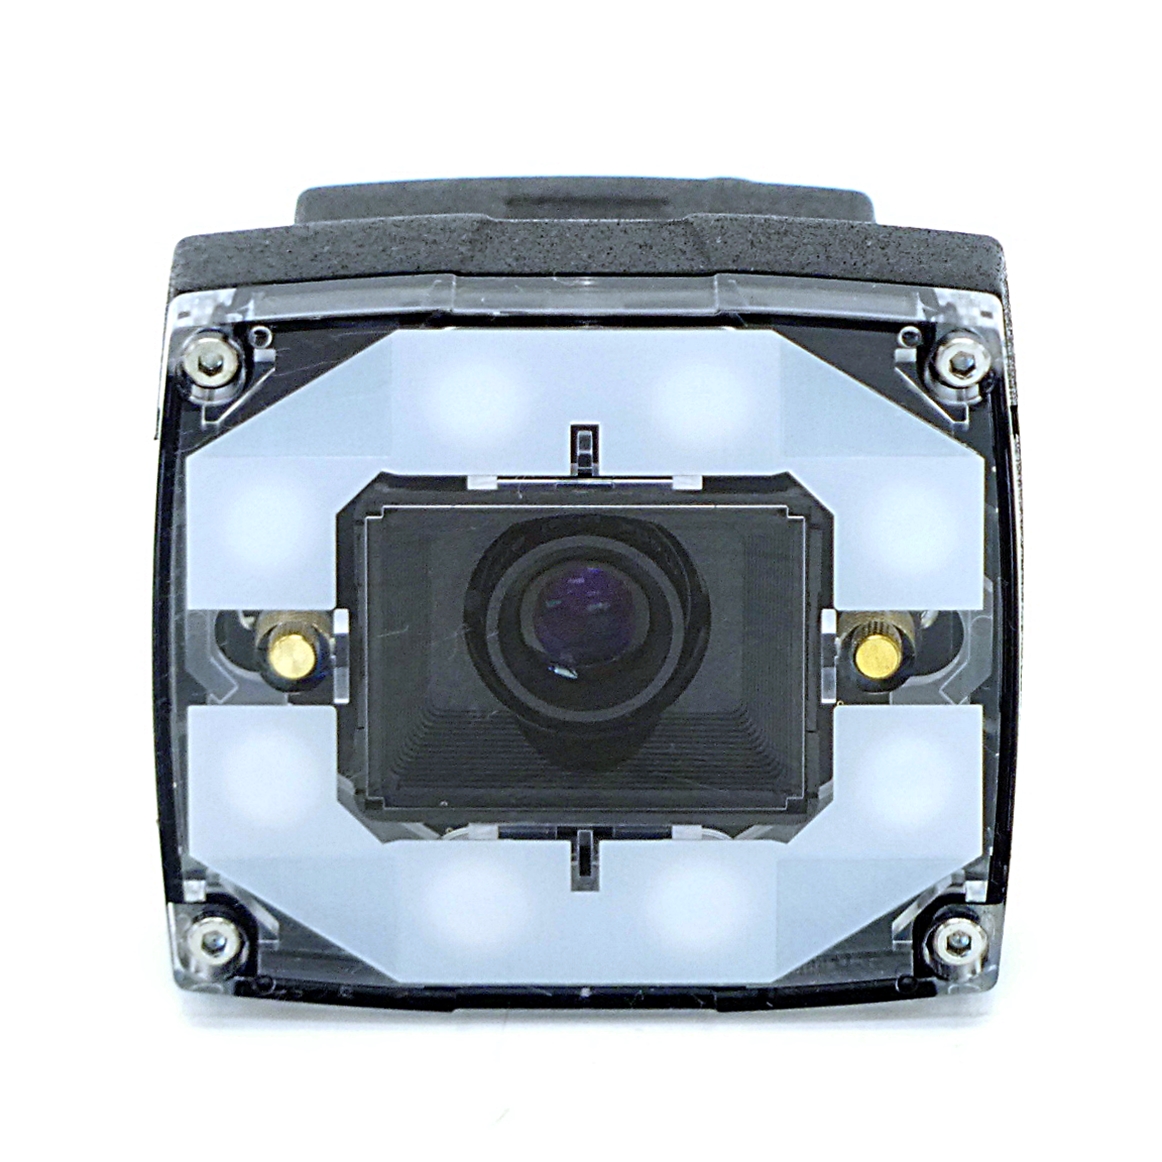 In-Sight 2000 Vision Sensor IS2000M-130-40-125 